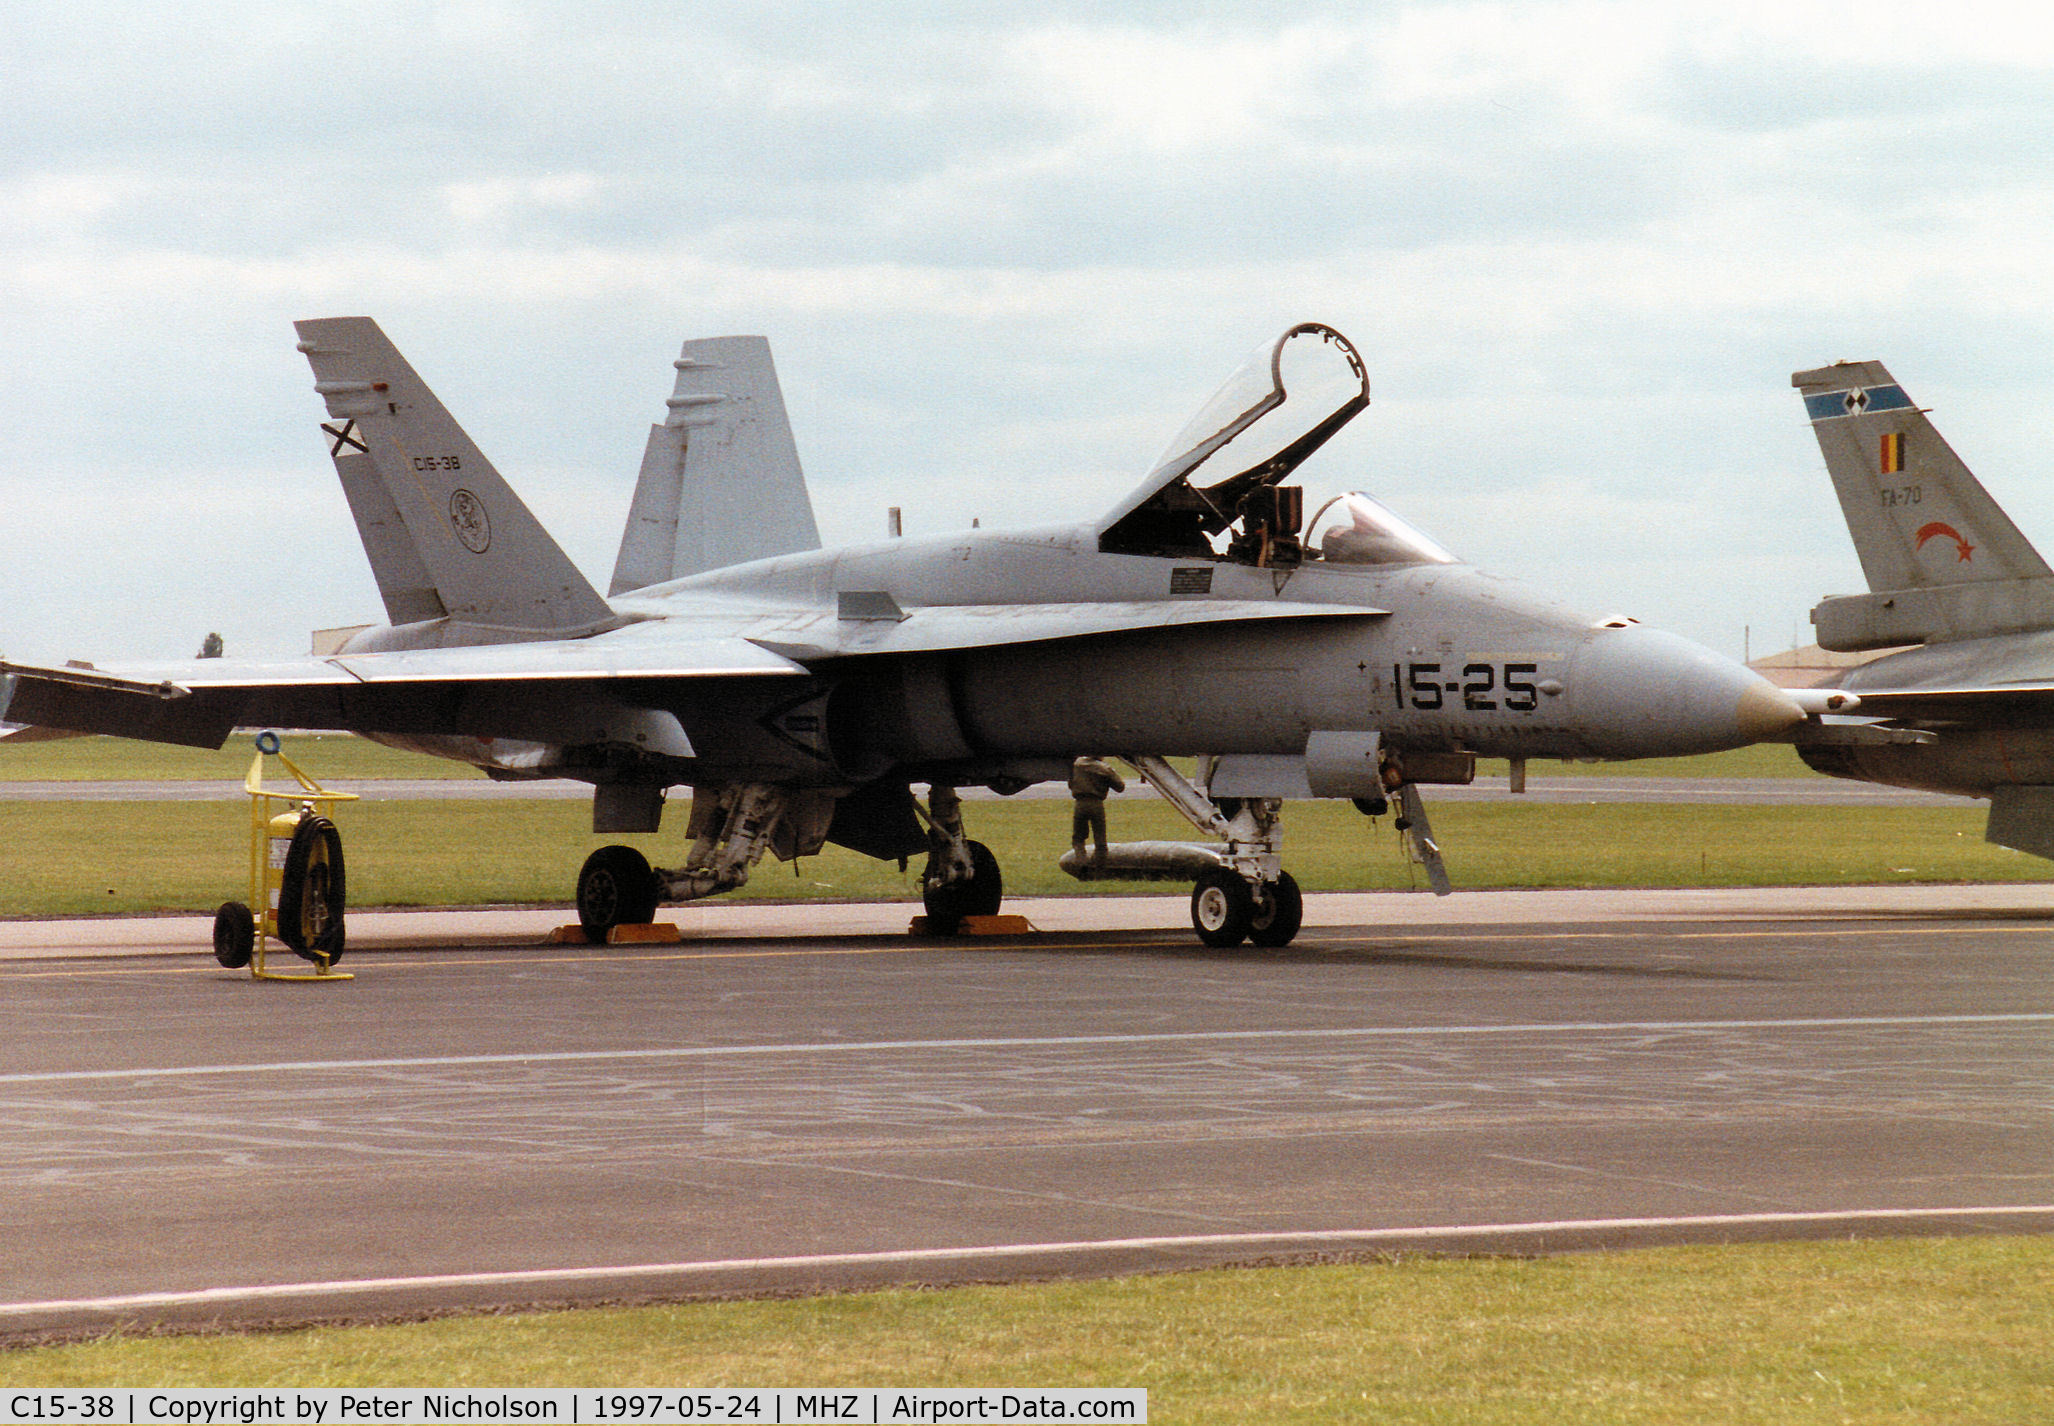 C15-38, McDonnell Douglas EF-18A Hornet C/N 0667/A543, Another view of the EF-18A Hornet of Ala 15 Spanish Air Force on the flight-line at the 1997 RAF Mildenhall Air Fete.